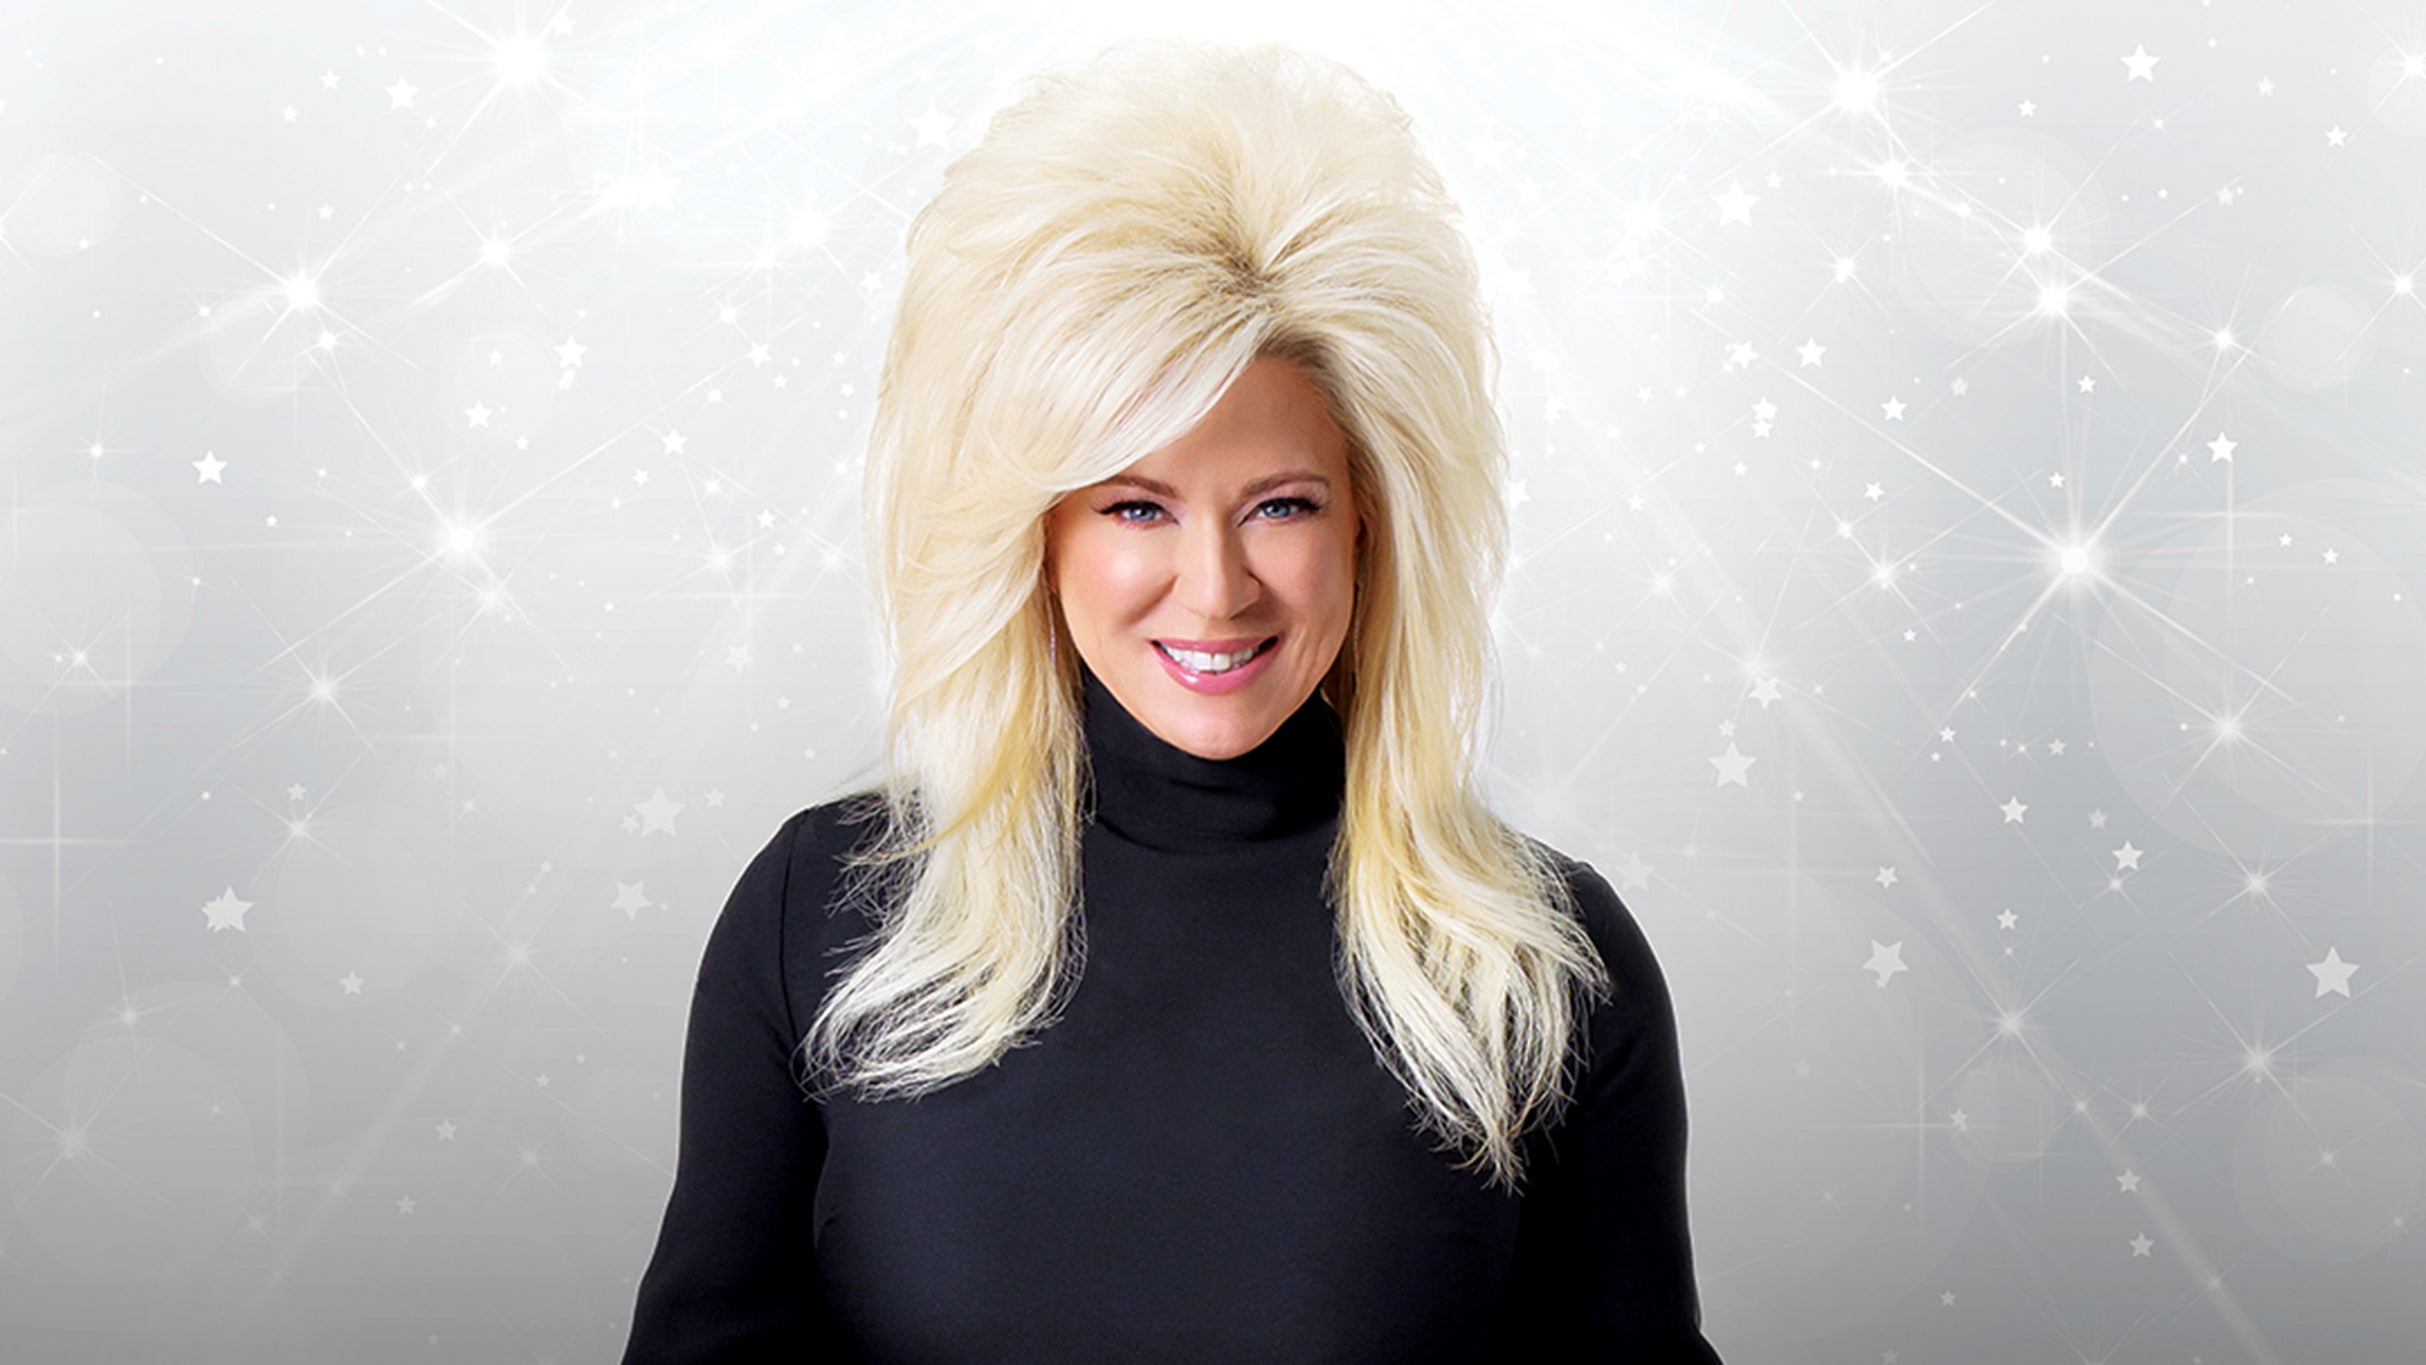 Theresa Caputo Live! The Experience in Calgary promo photo for Radio presale offer code